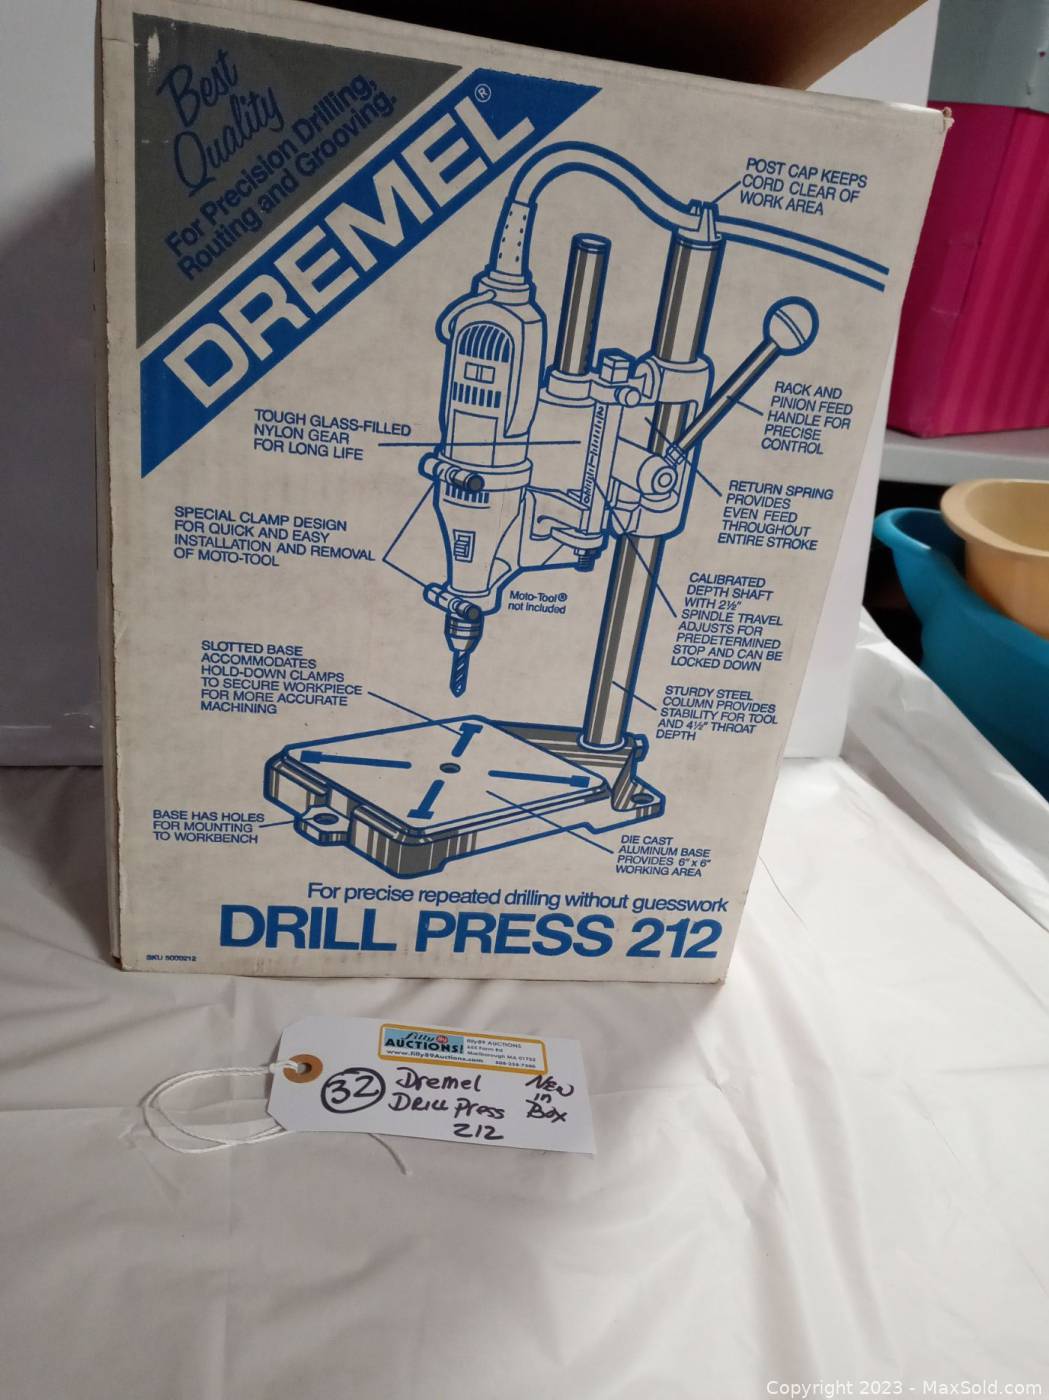 At Auction: Dremel Drill Press 212 Workstation Stand